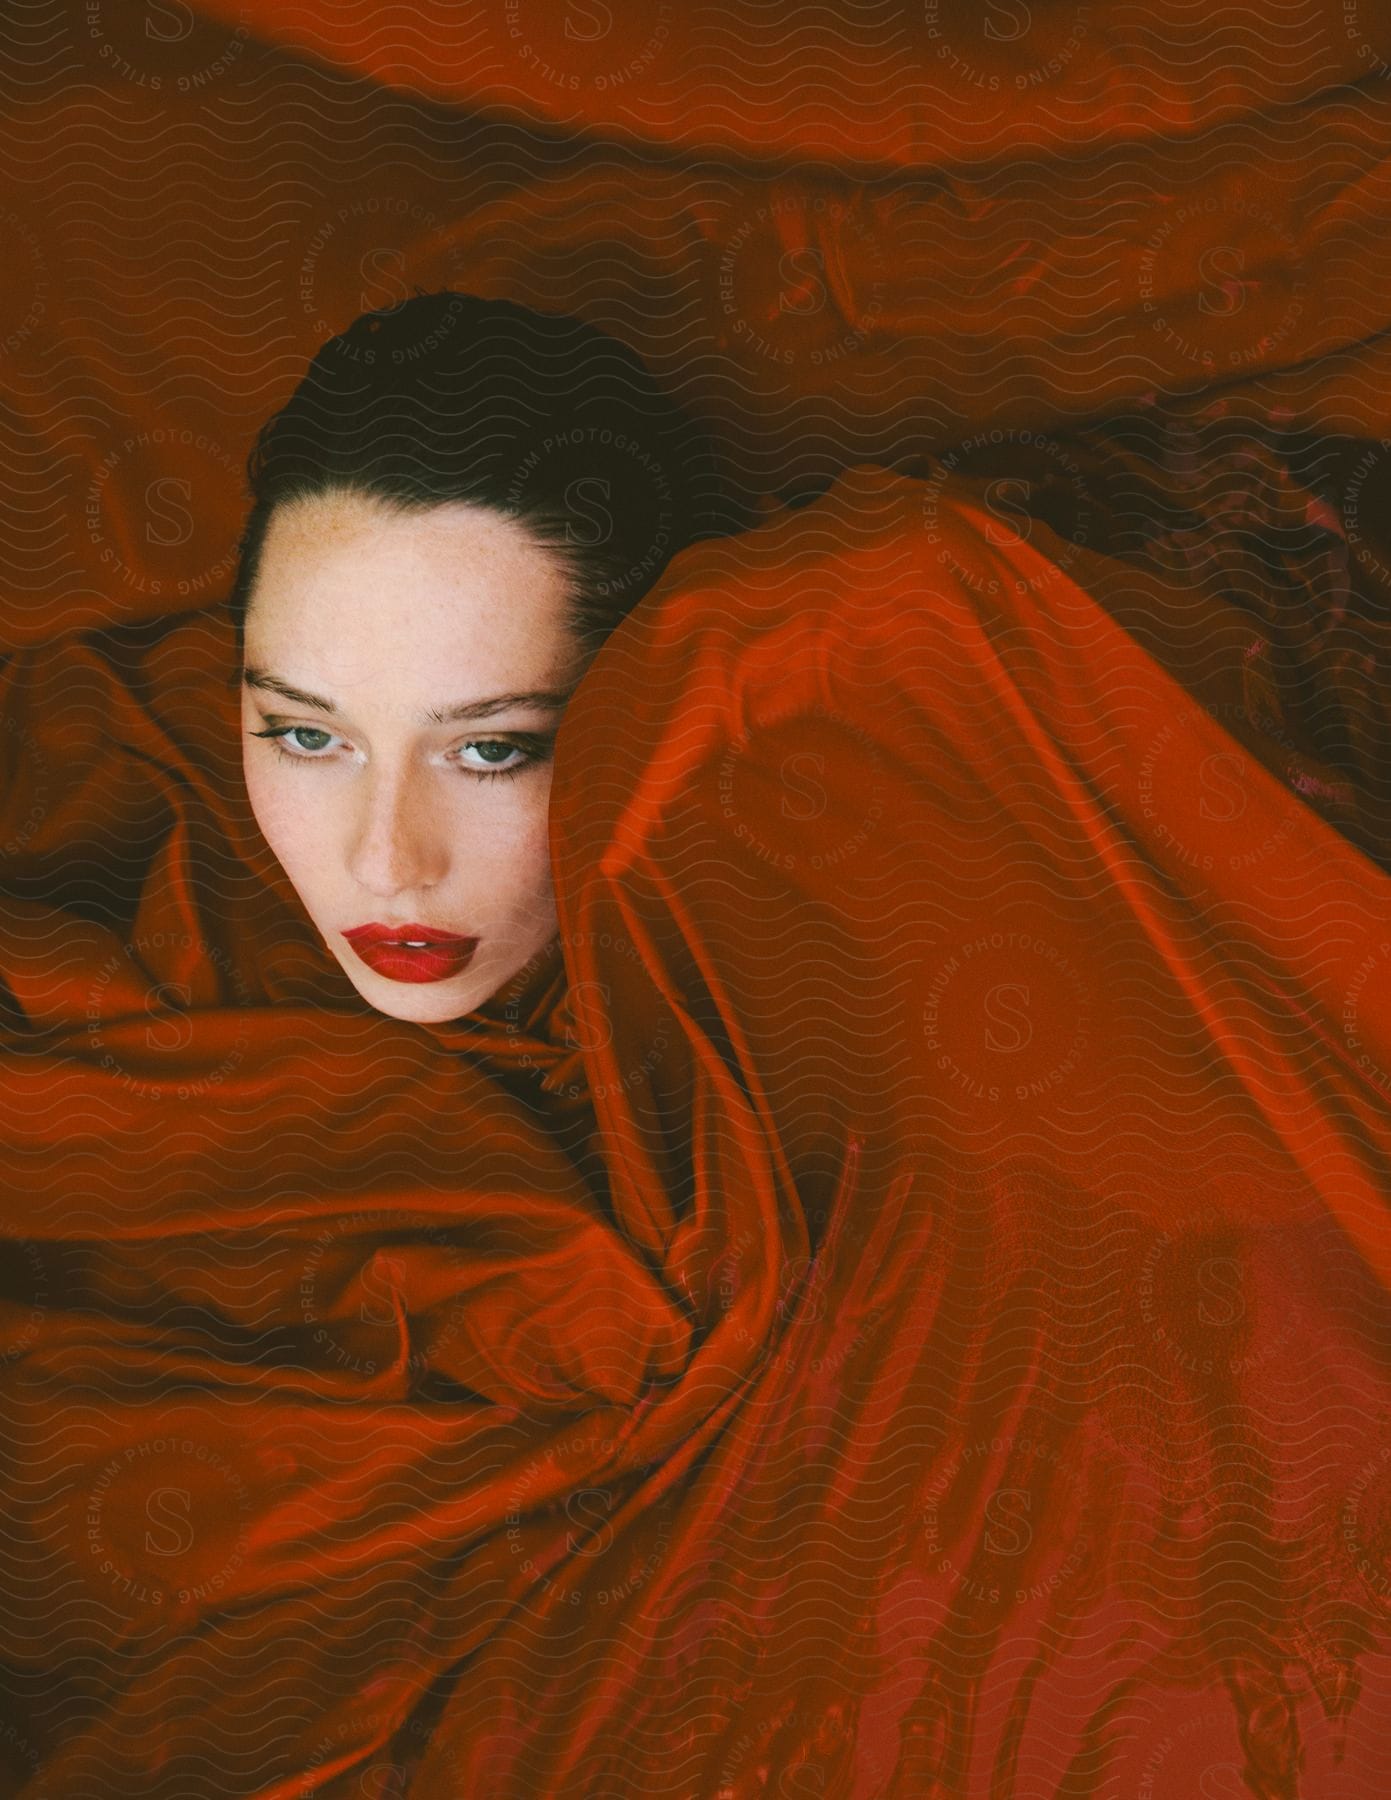 Stock photo of a woman wrapped up in red blankets.